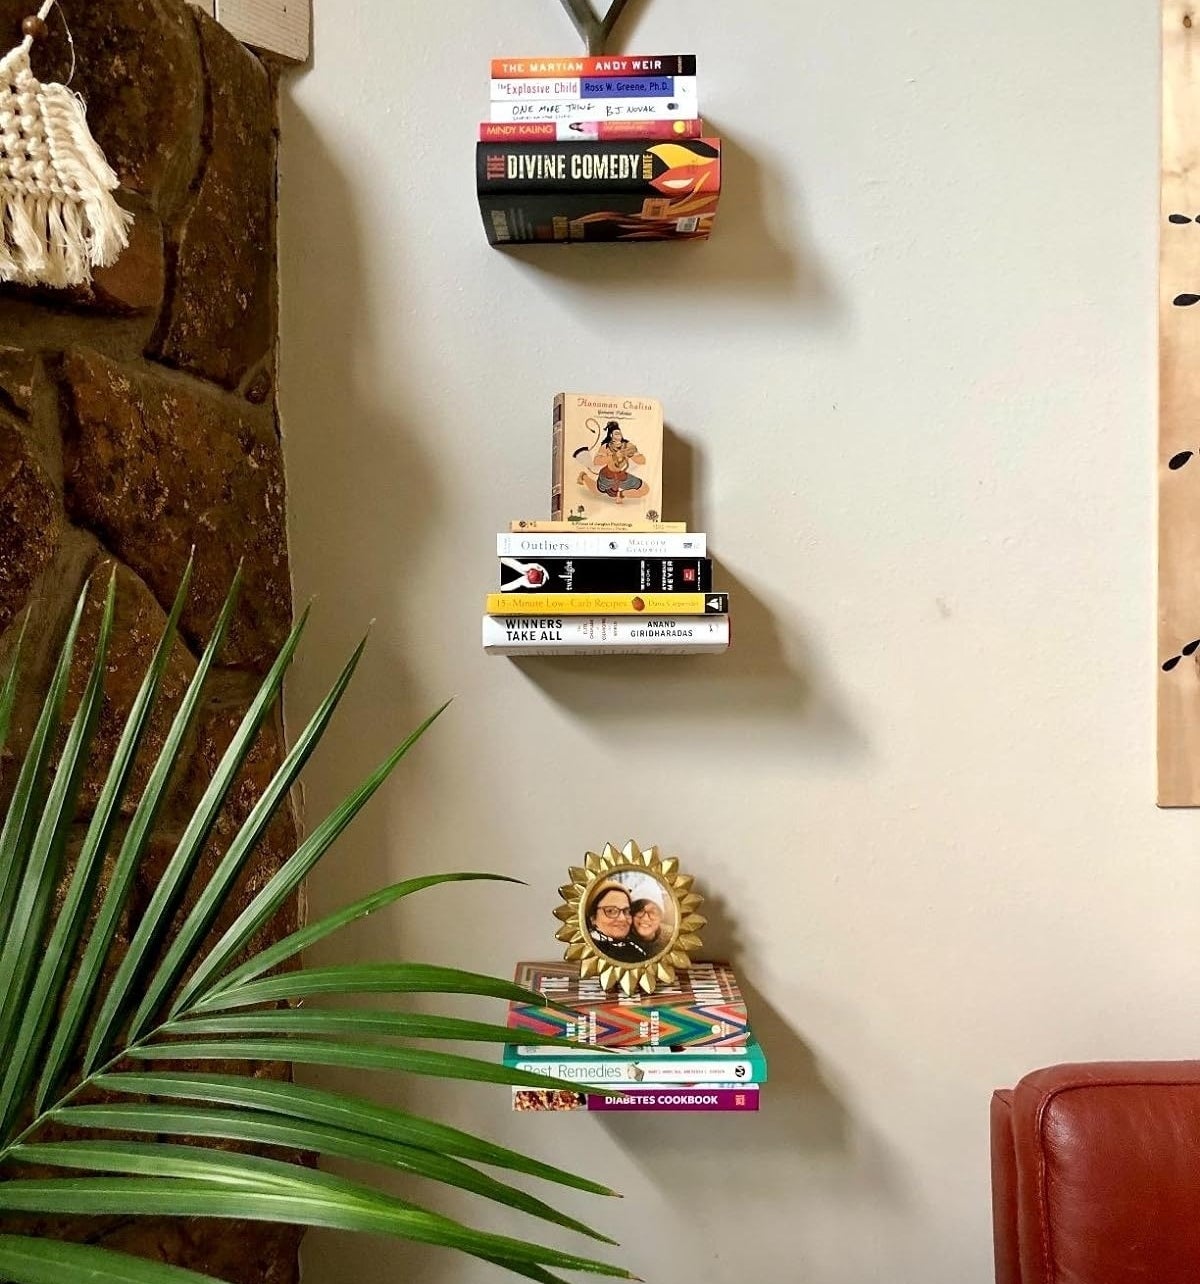 Wall-mounted shelves with a variety of books, next to a green potted plant and part of a red chair